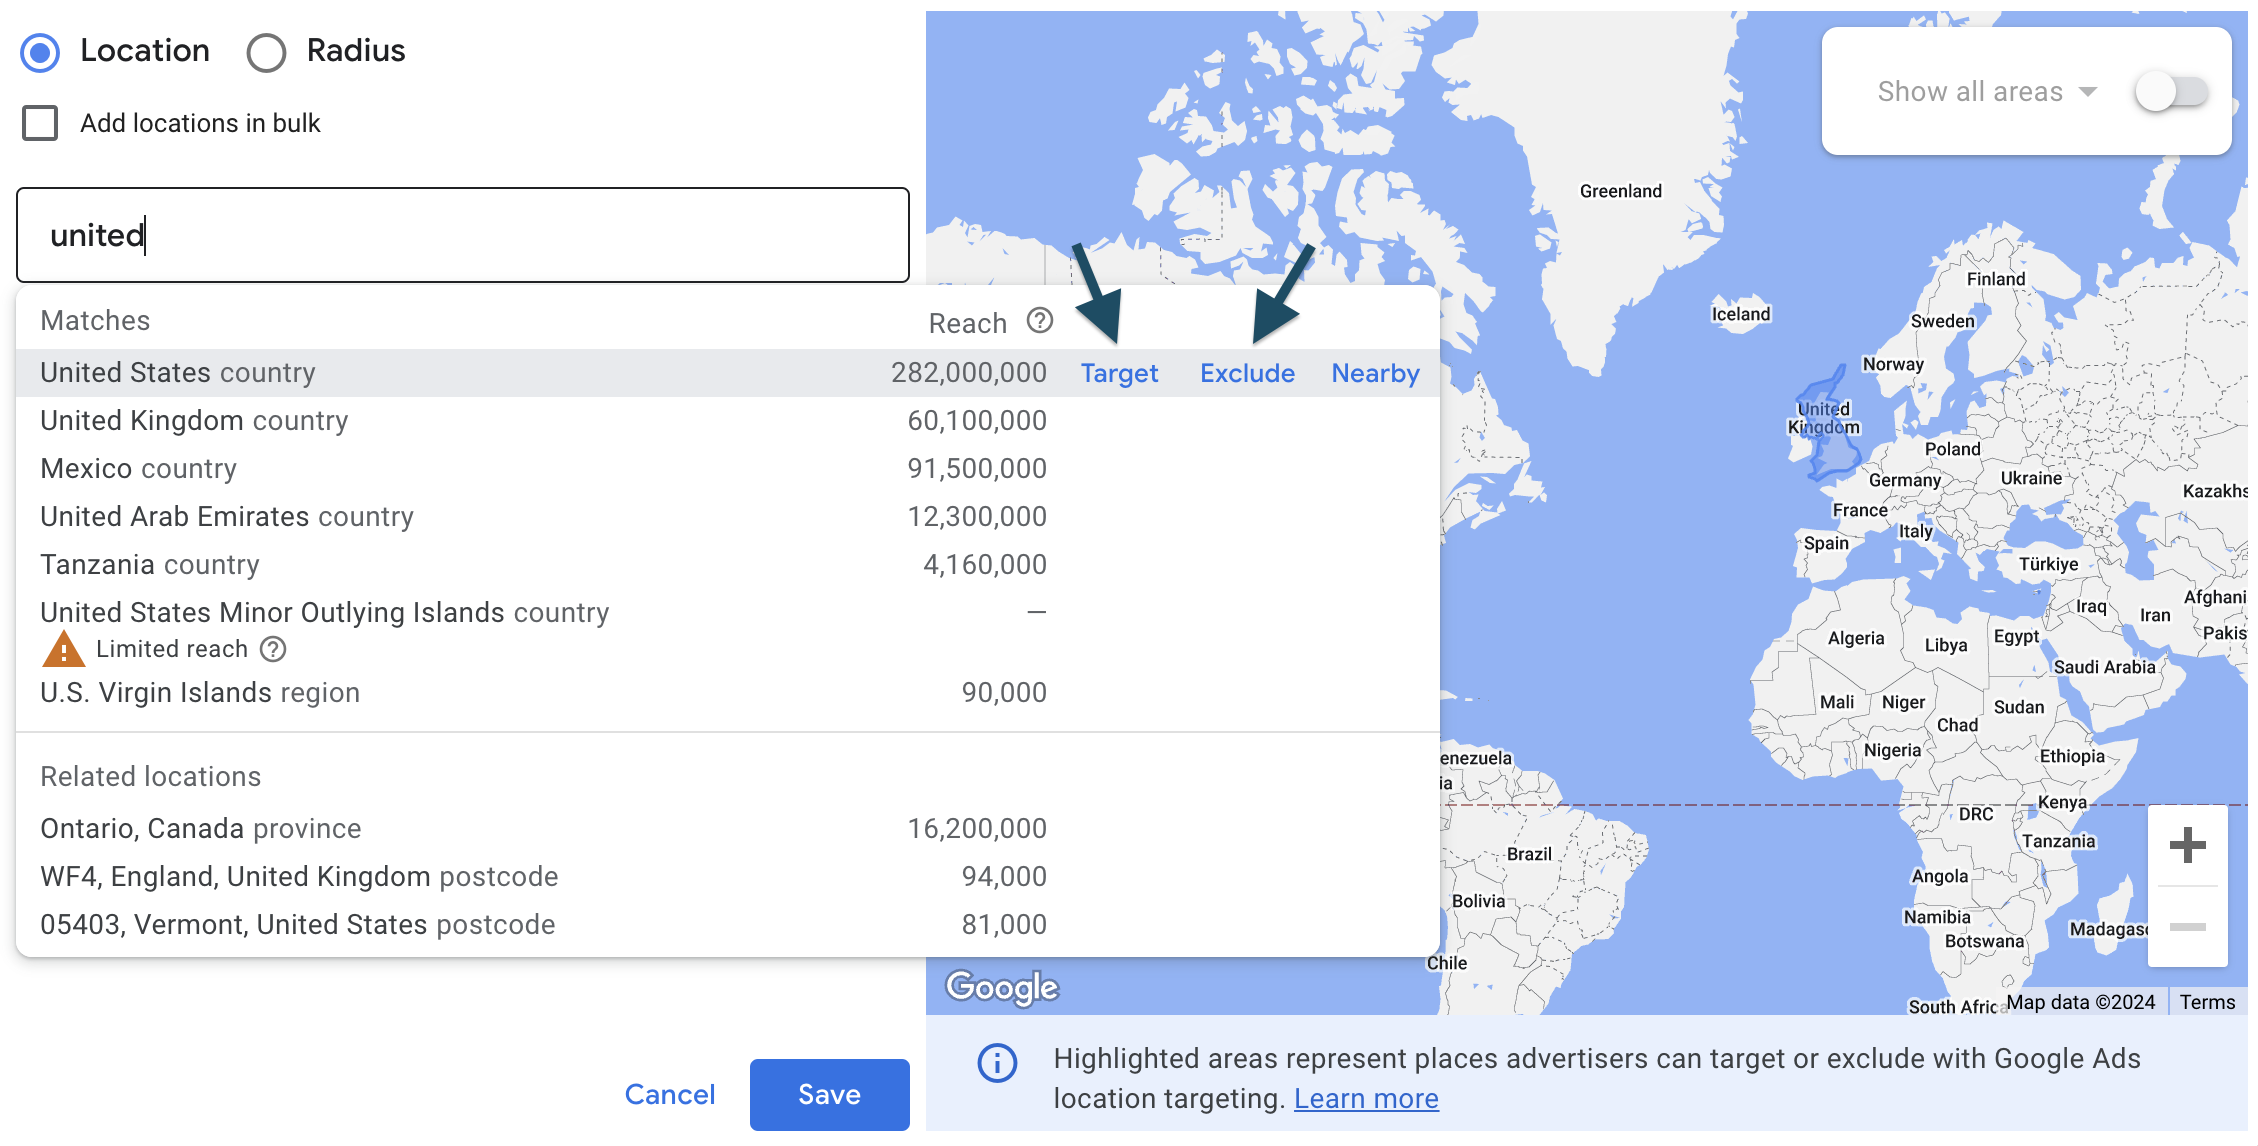 Adding and excluding location targeting in Google Ads campaign